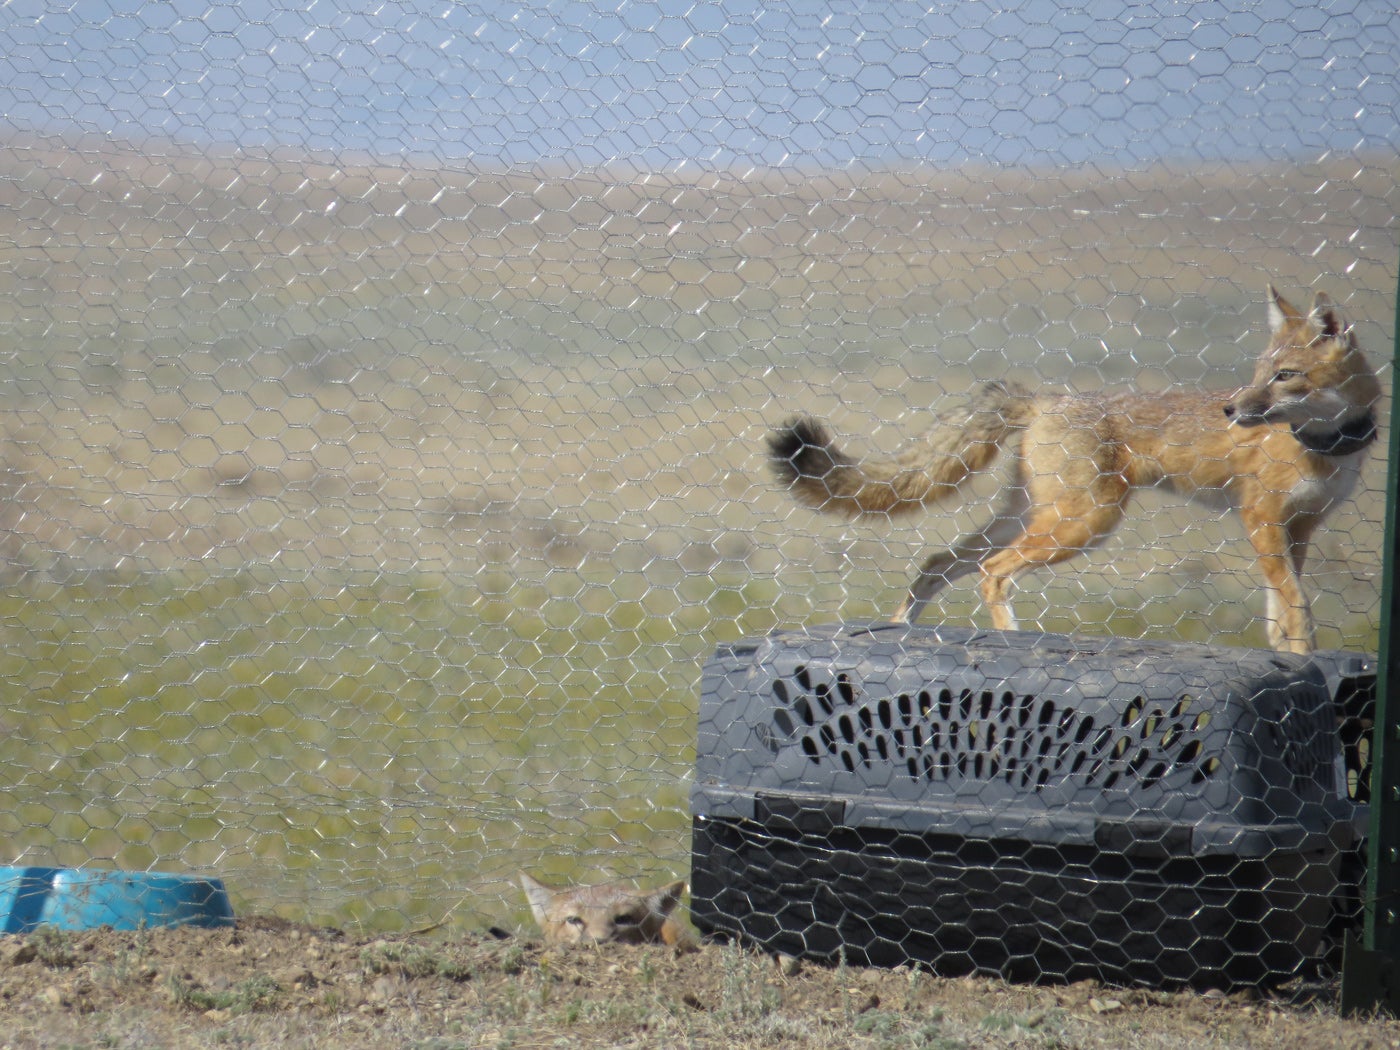 A swift fox stands on top of a crate inside of a soft-release pen on an open prairie. A second fox can be seen sticking its head out of a burrow inside the same pen, and a water bowl sits nearby.